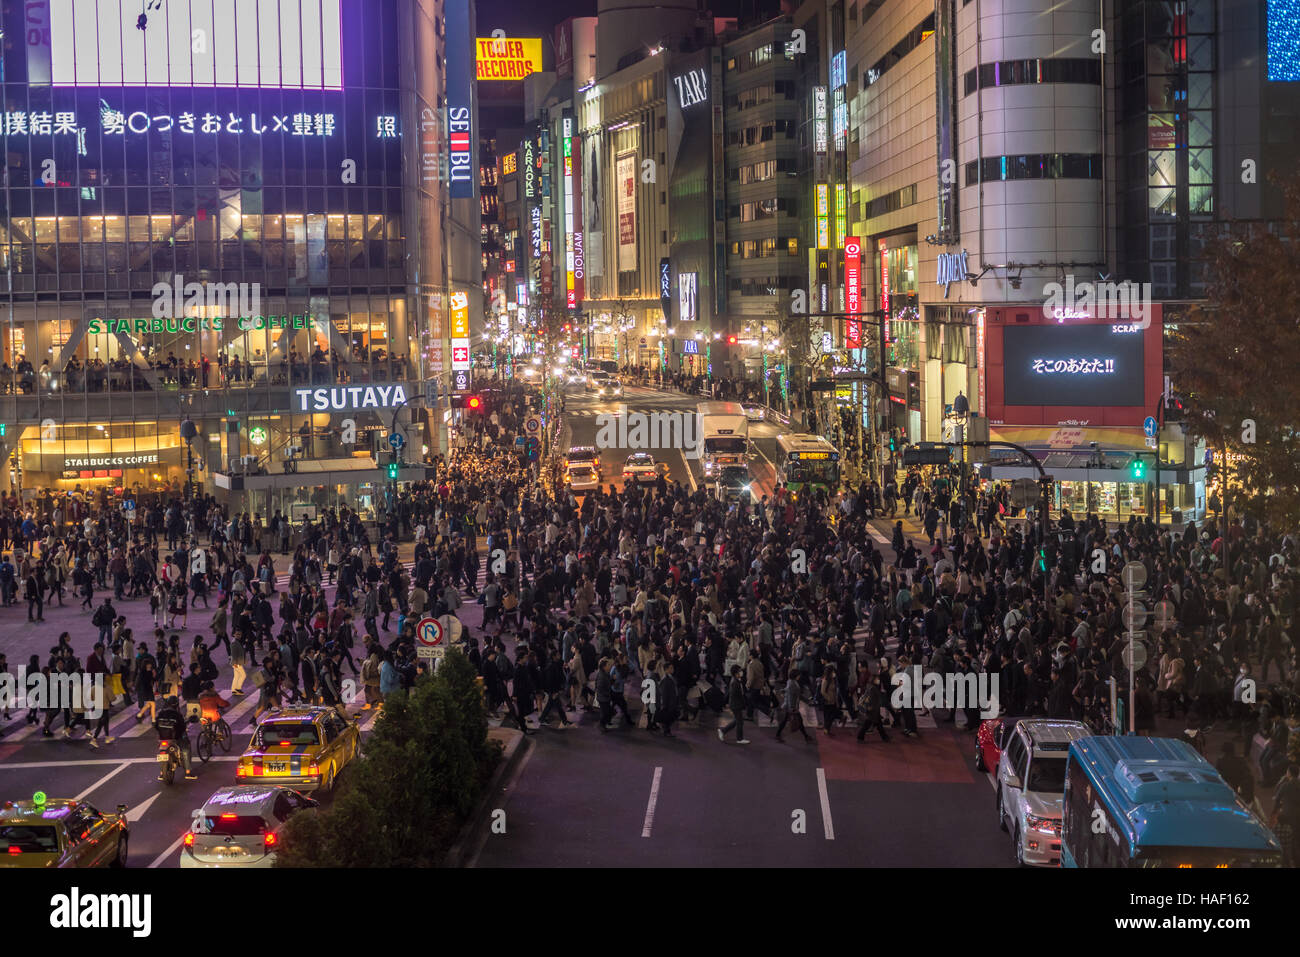 TOKYO, JAPAN - November, 22, 2014: Shibuya crossing in Tokyo, the busiest intersection in the world Stock Photo